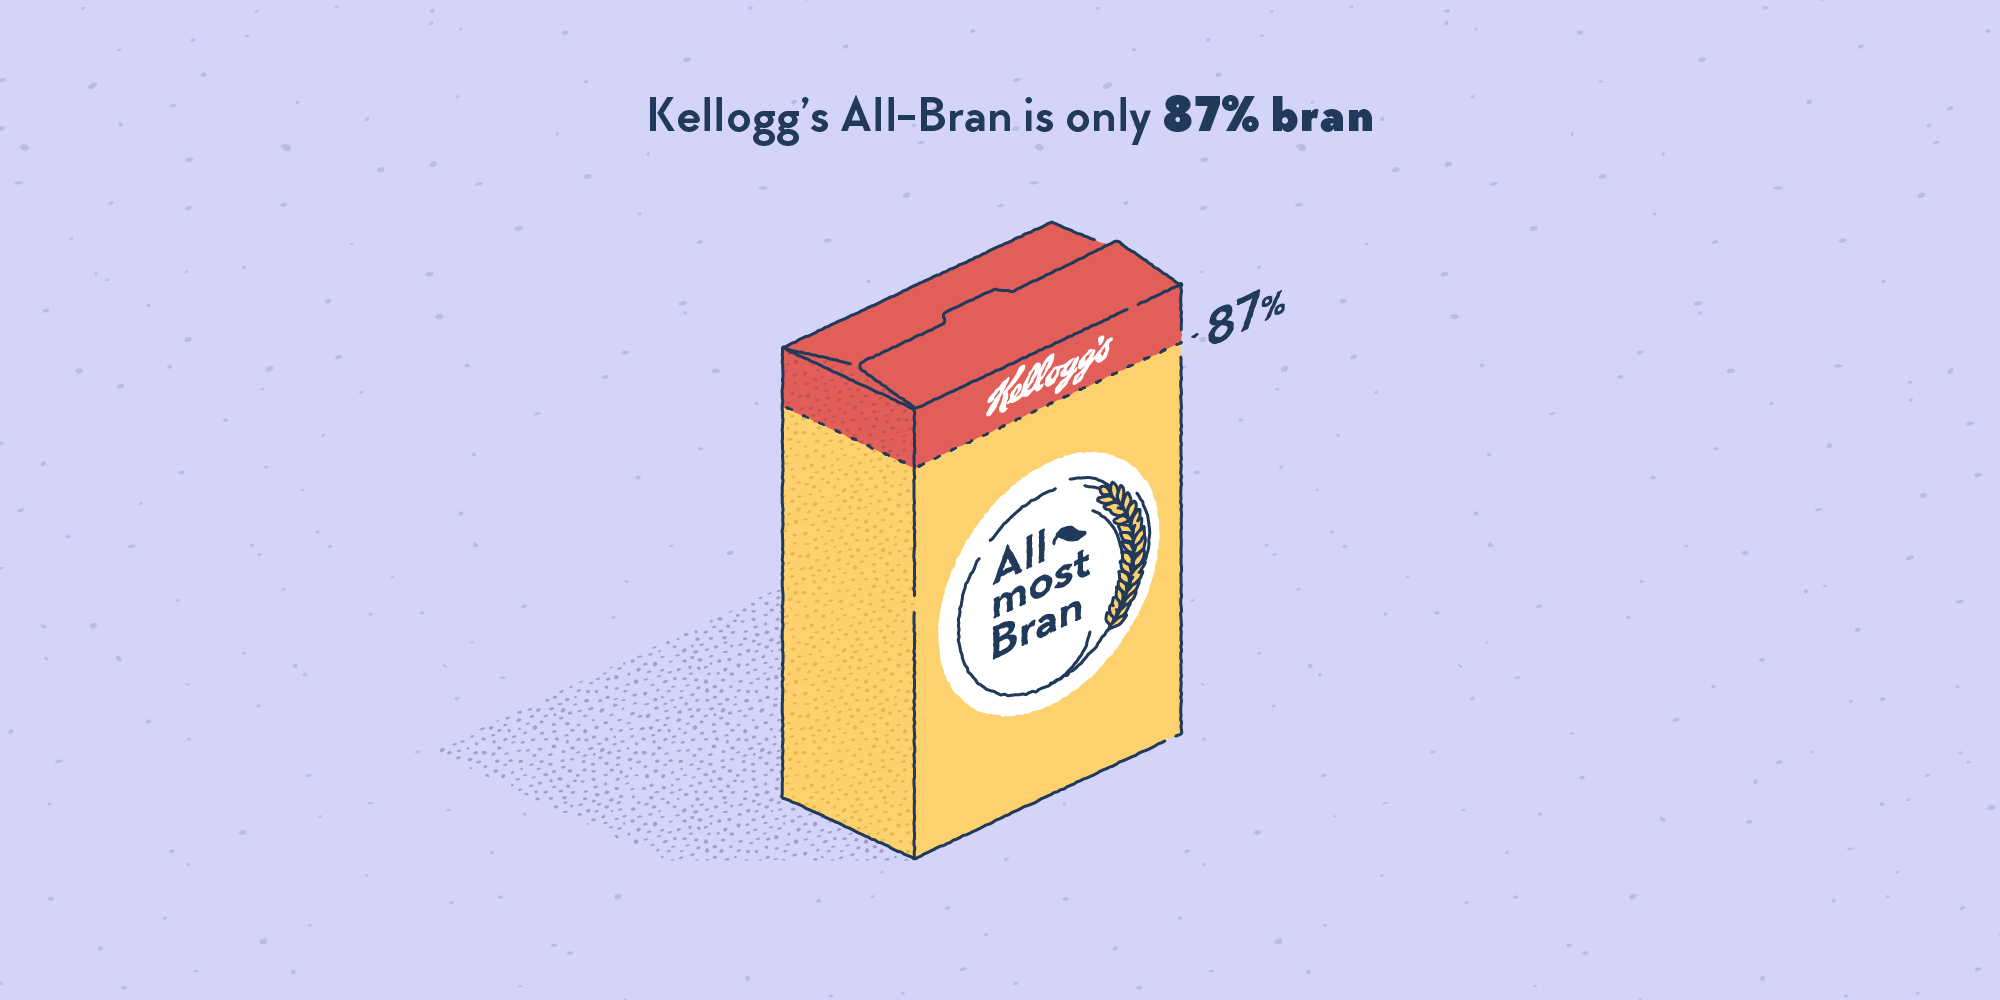 A box of All-Bran breakfast cereals, except that it says “Almost Bran”. A large part, but not all, of the box is highlighted, with a label reading “87%”.